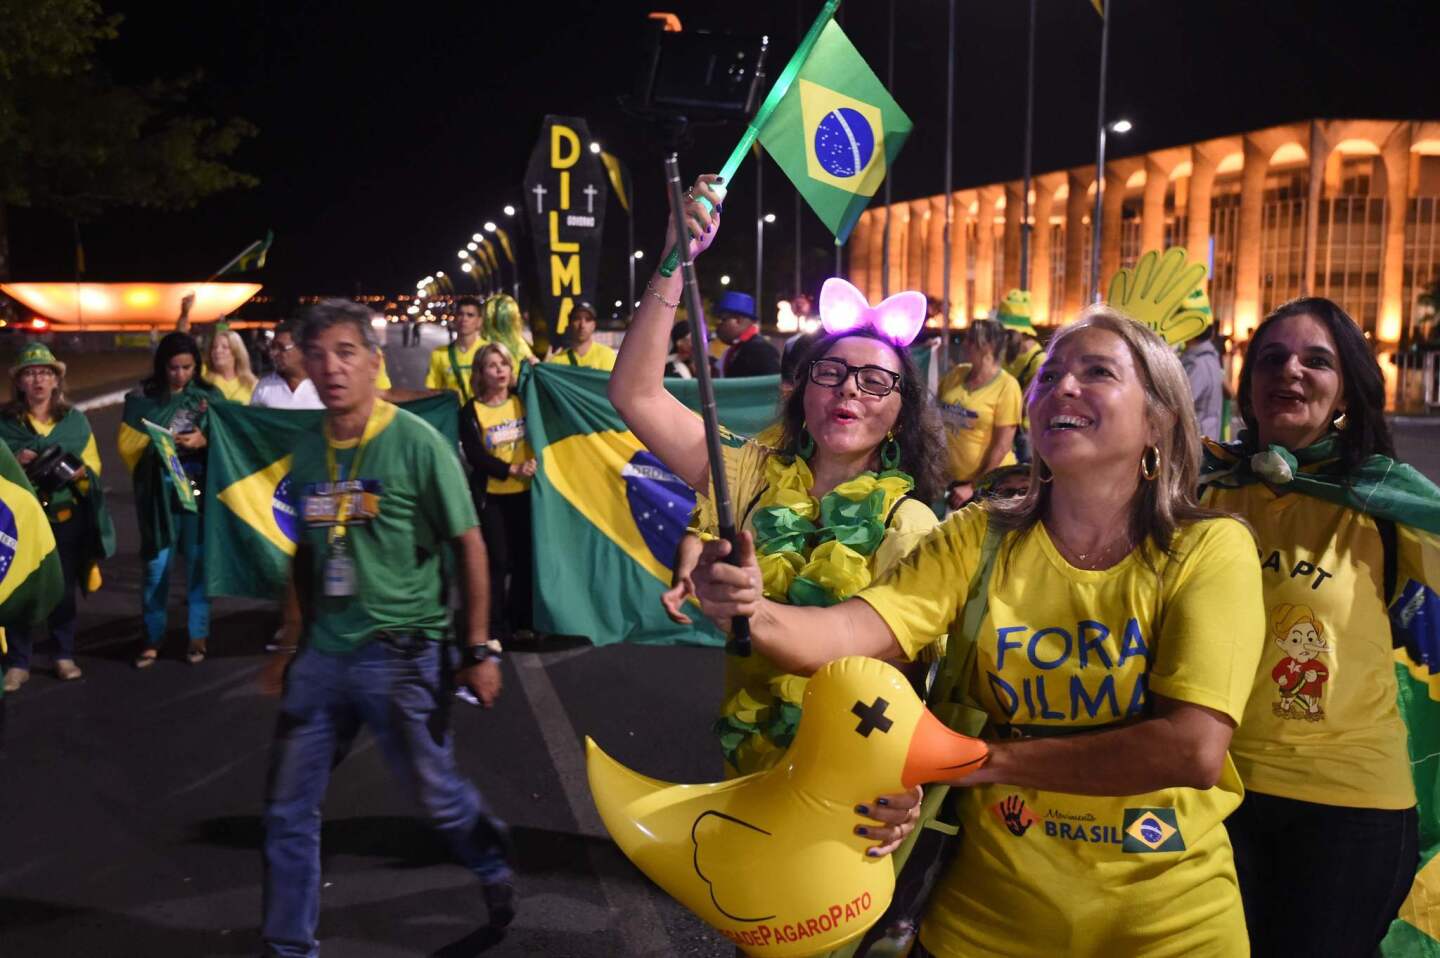 Brazilians take to the streets ahead of impeachment vote